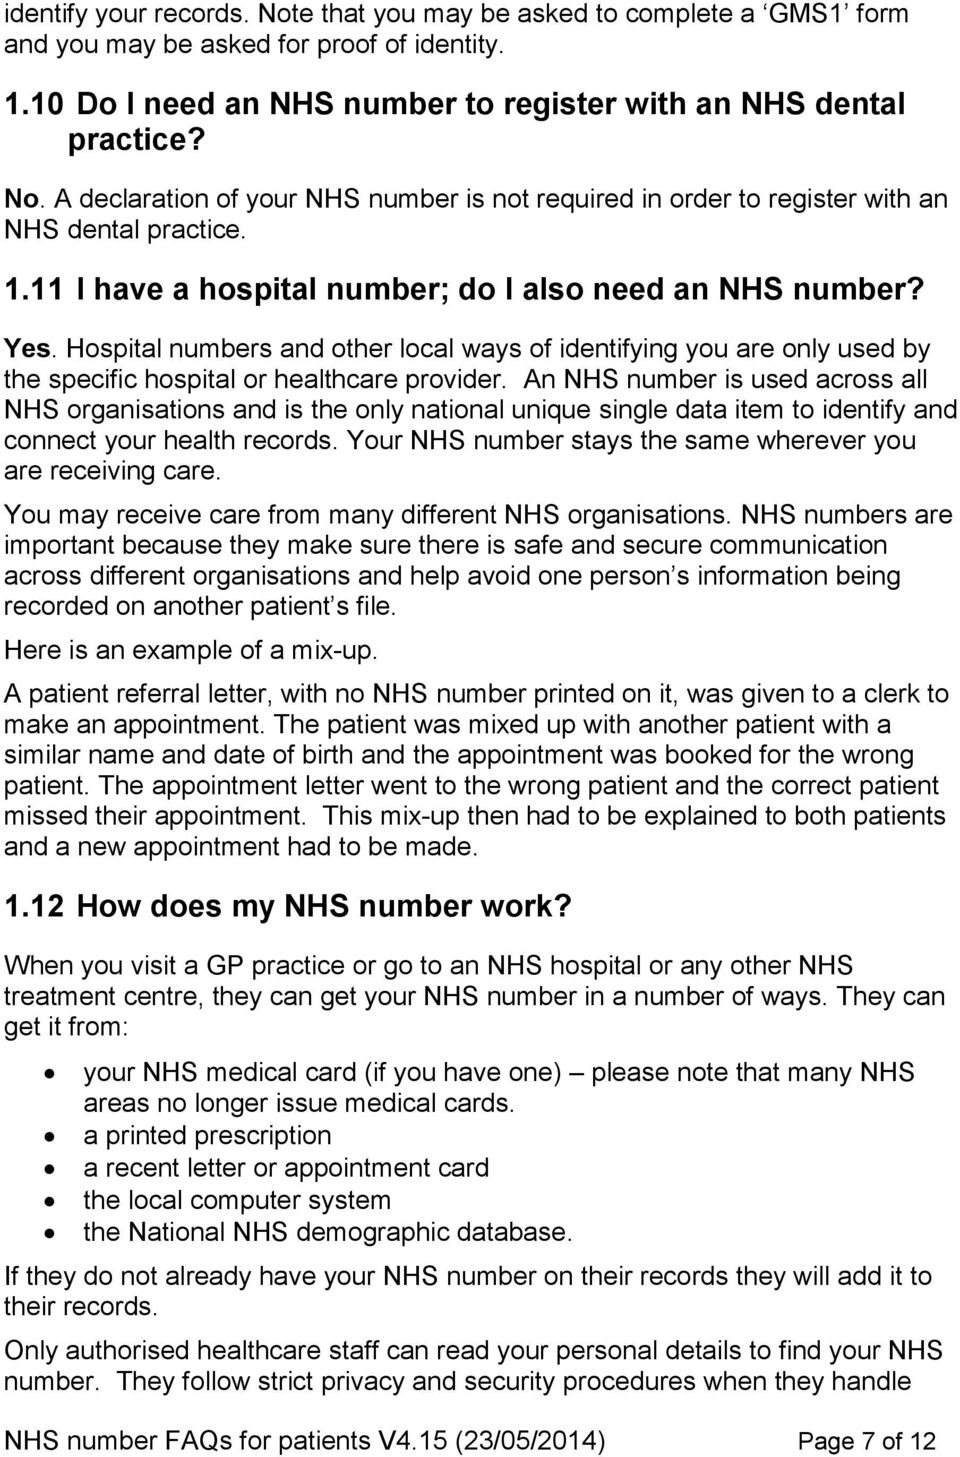 An NHS number is used across all NHS organisations and is the only national unique single data item to identify and connect your health records.